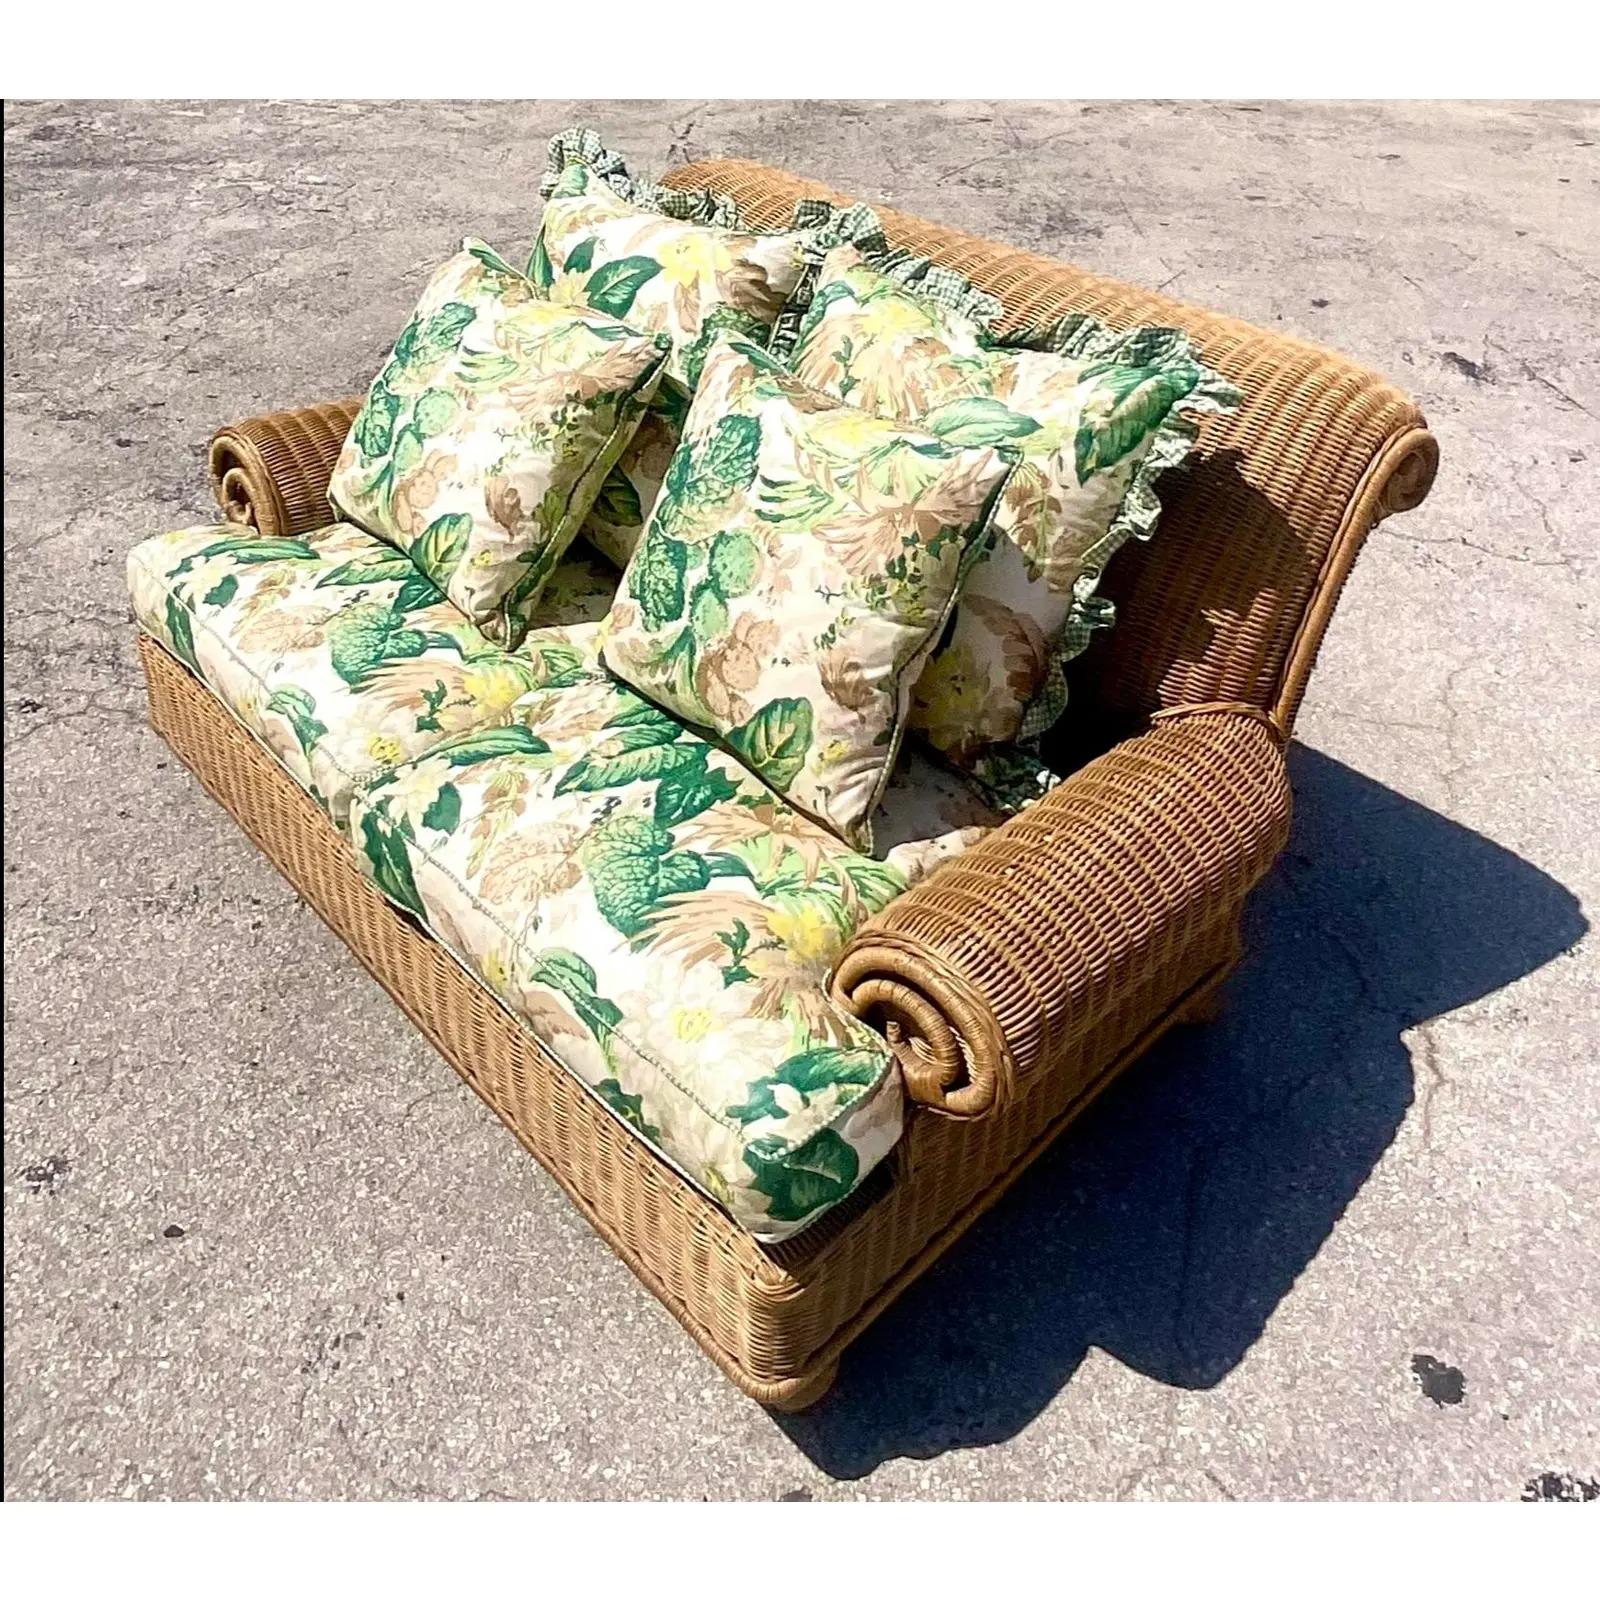 North American Vintage Coastal Ralph Lauren Woven Rattan Roll Arm Loveseat with Floral Cushions